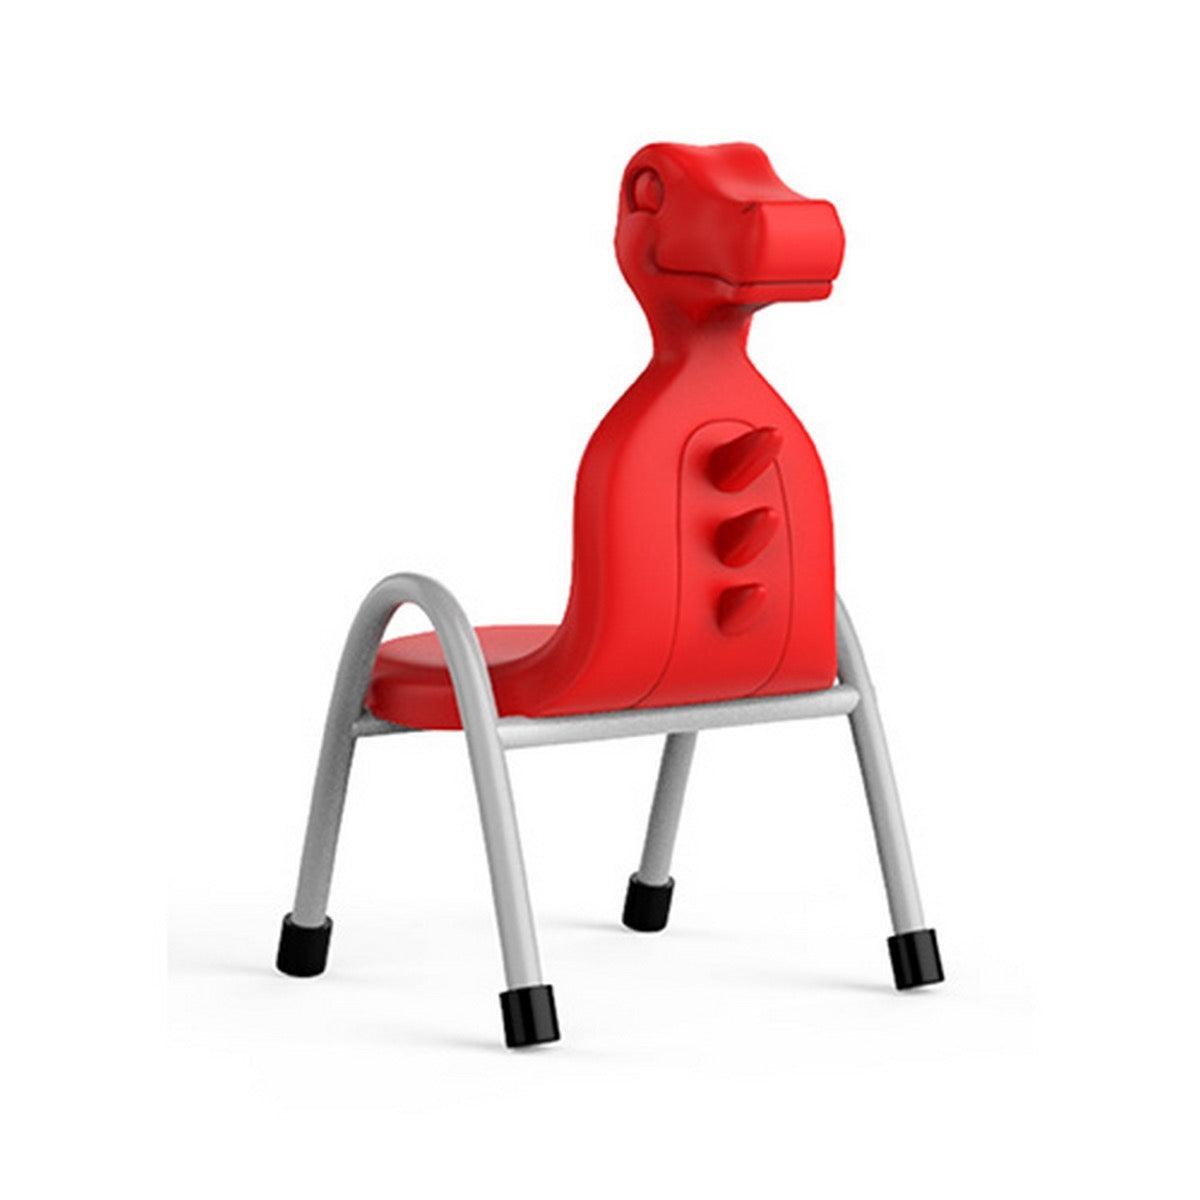 Ok Play Dino Chair, Study Chair, Sturdy And Durable Chair, Plastic Chair, Perfect For Home, Creches And School, Red, 2 to 4 Years, Height 8 Inches